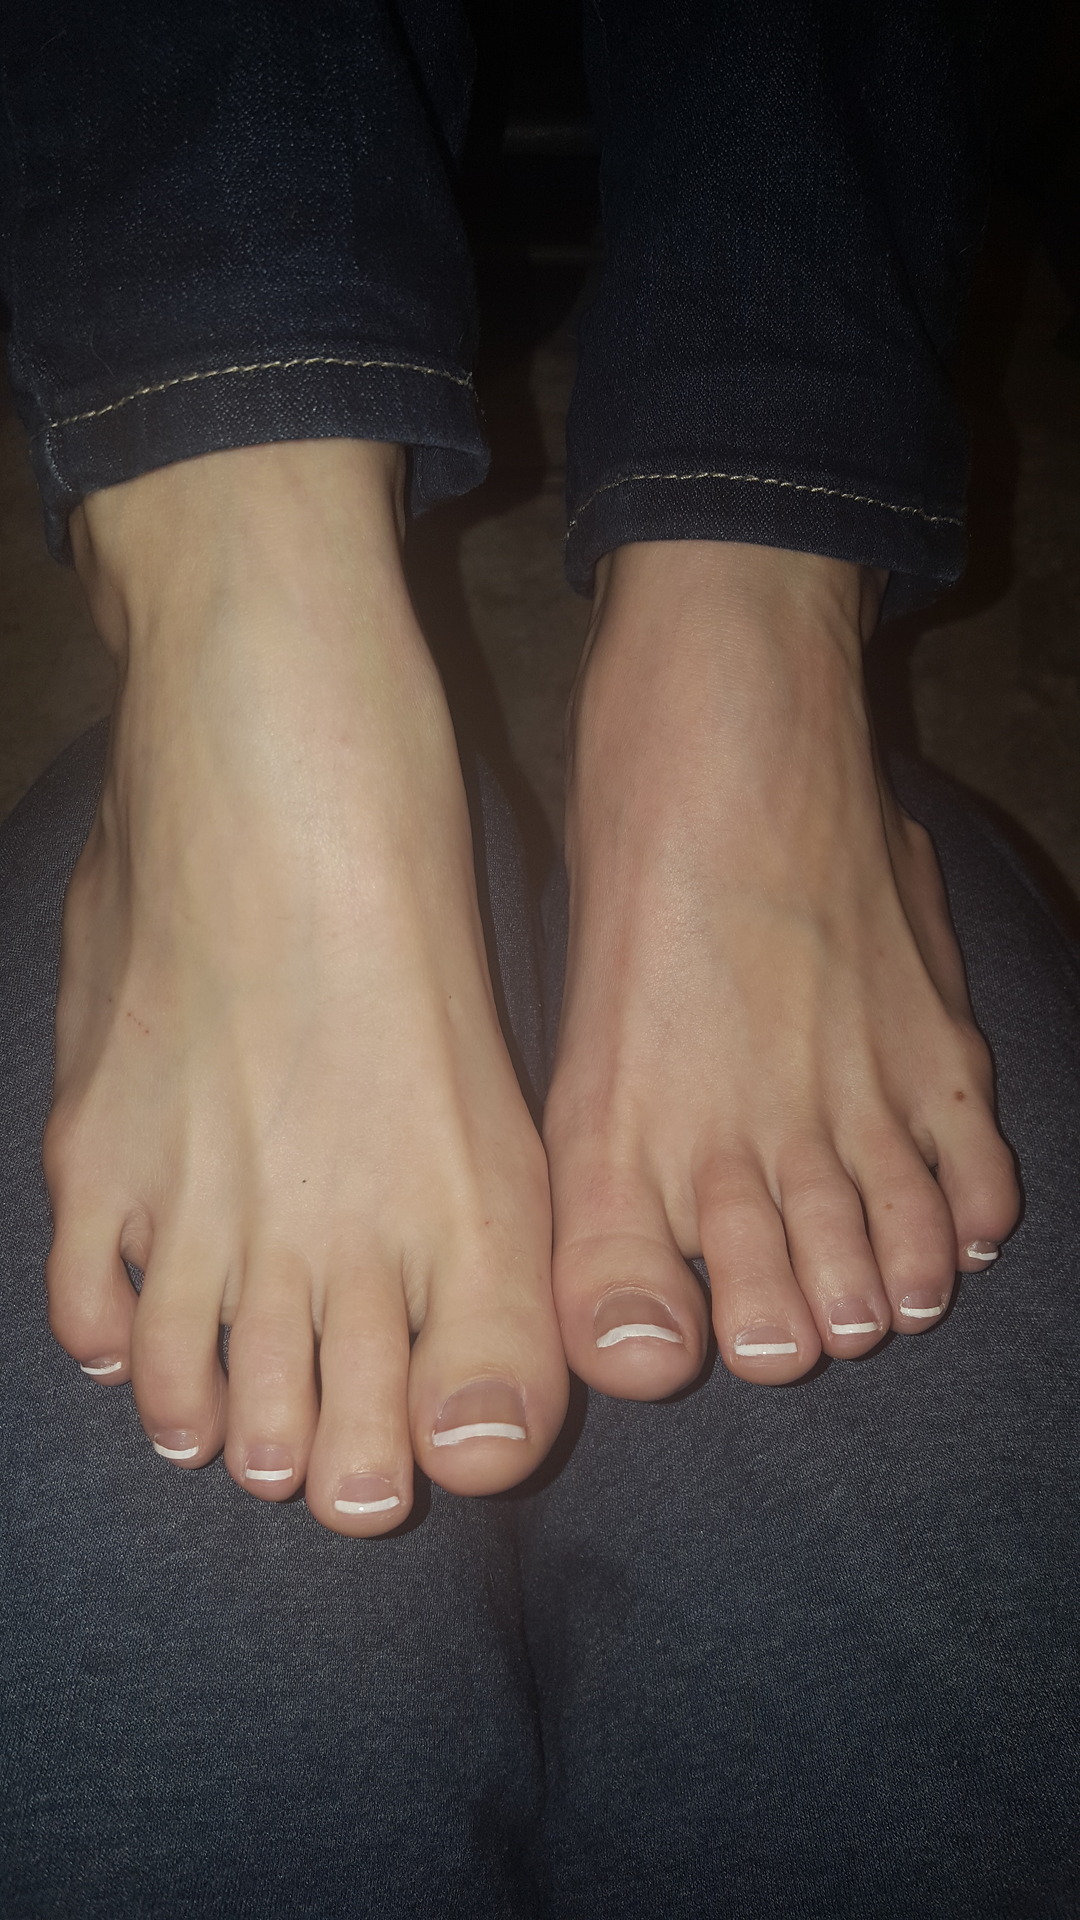 Candid Homemade And All Original Pics — My Pov Of My Pretty Wife S Sexy Feet In My